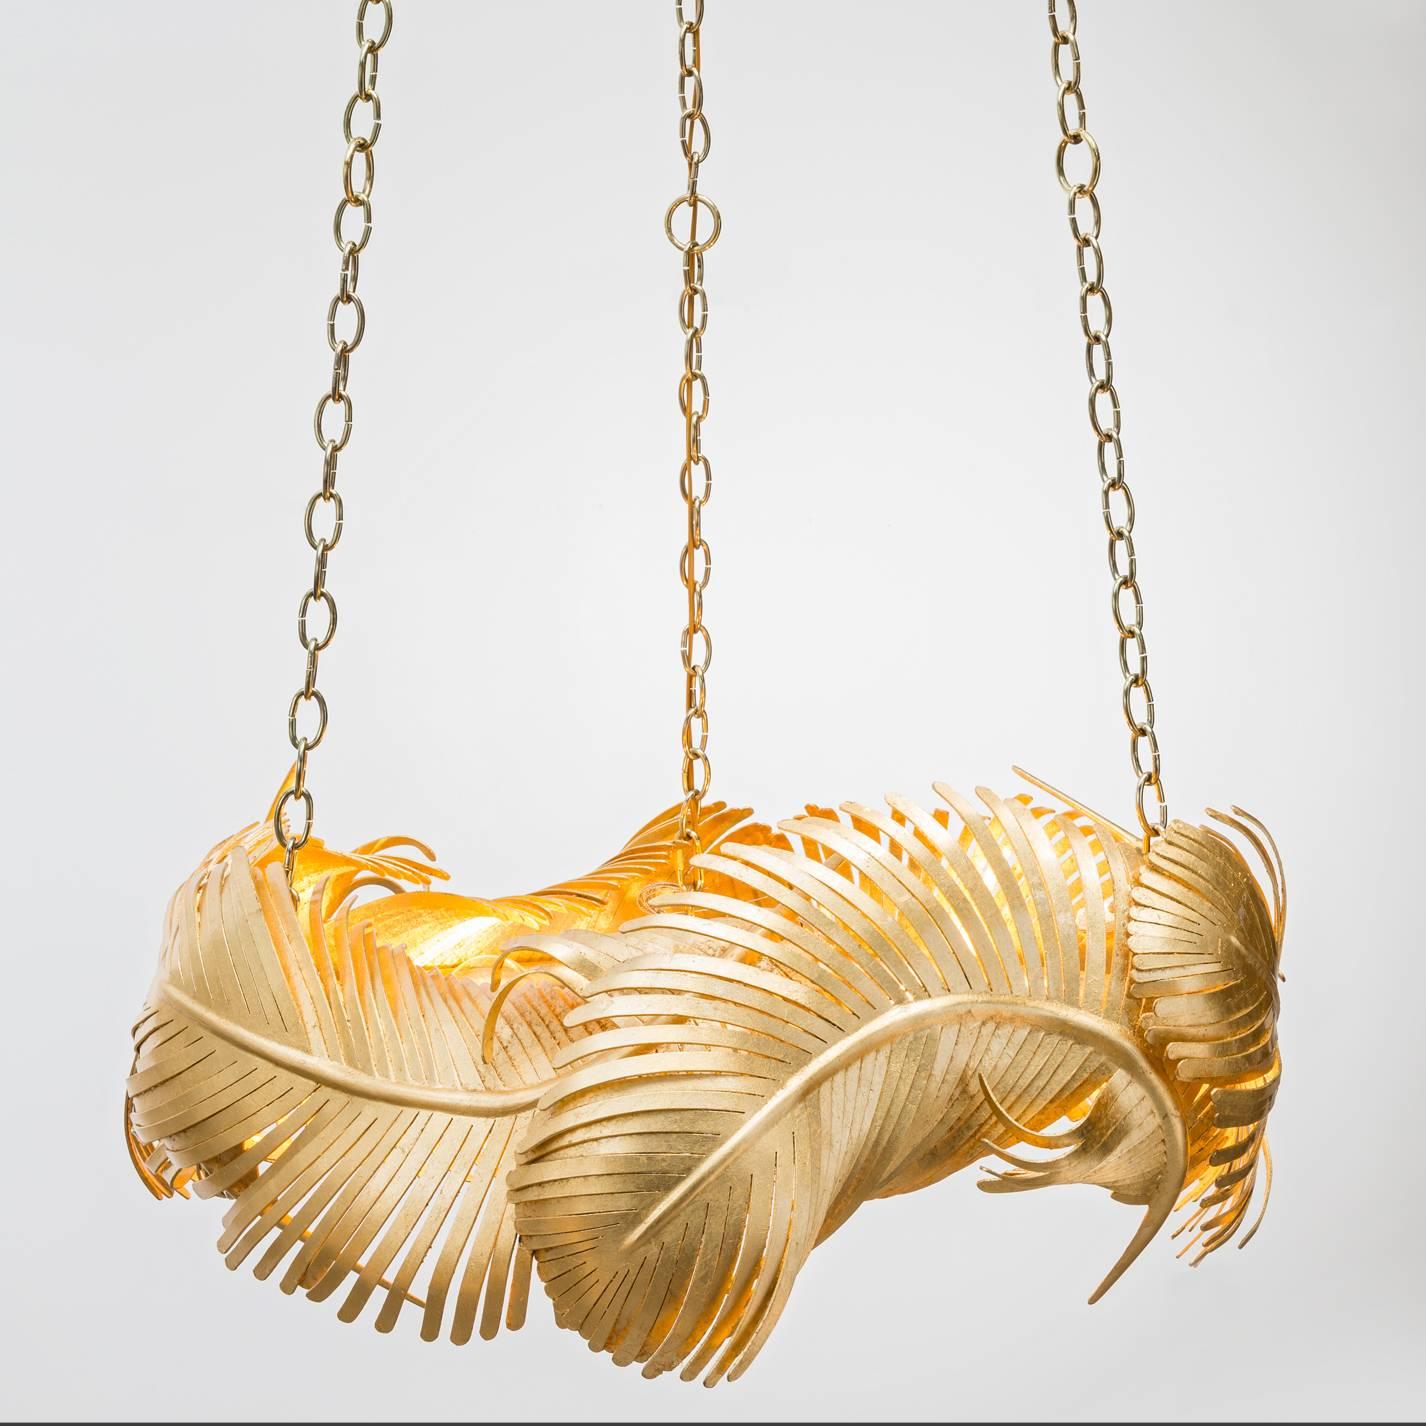 The Josette chandelier is a sculptural fete featuring hand-forged gold leaf over iron feathers suspending from custom brass poles. Light bulbs: Eight clear globe g25 standard base 60 watt max (not included). This is a showroom sample sold as is. CSA